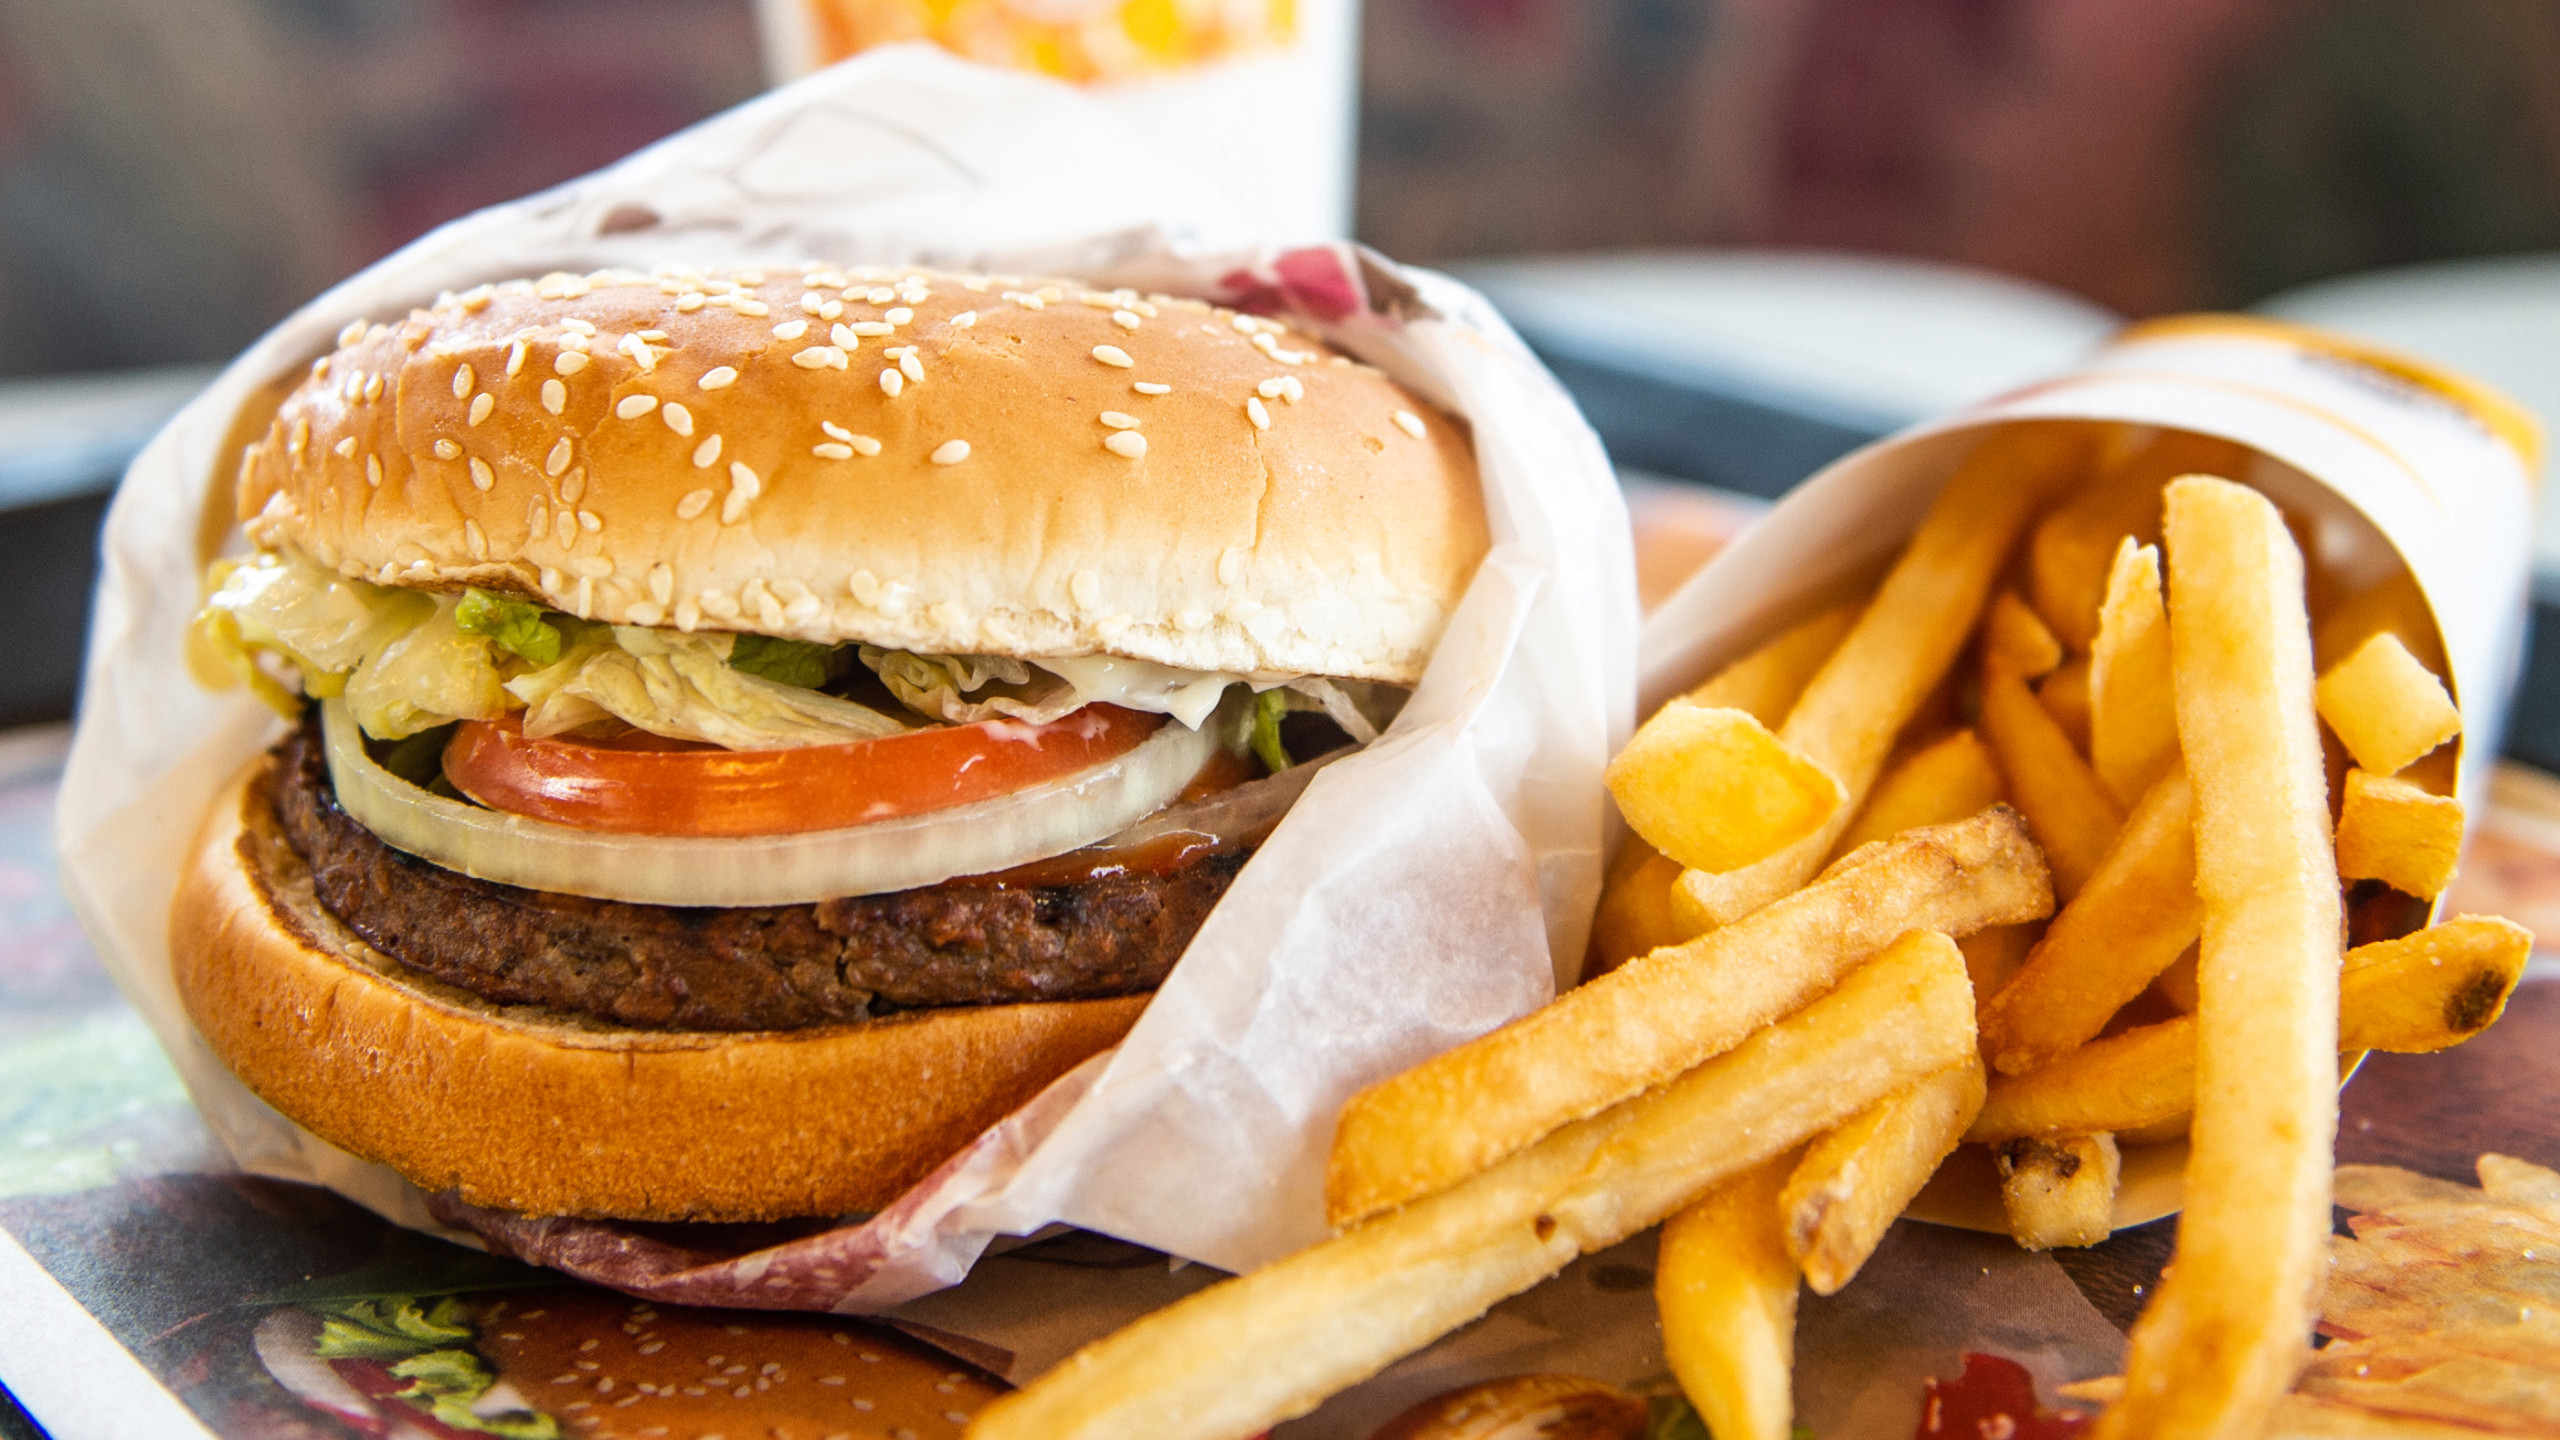 Burger King Is Launching The Impossible Whopper Nationwide